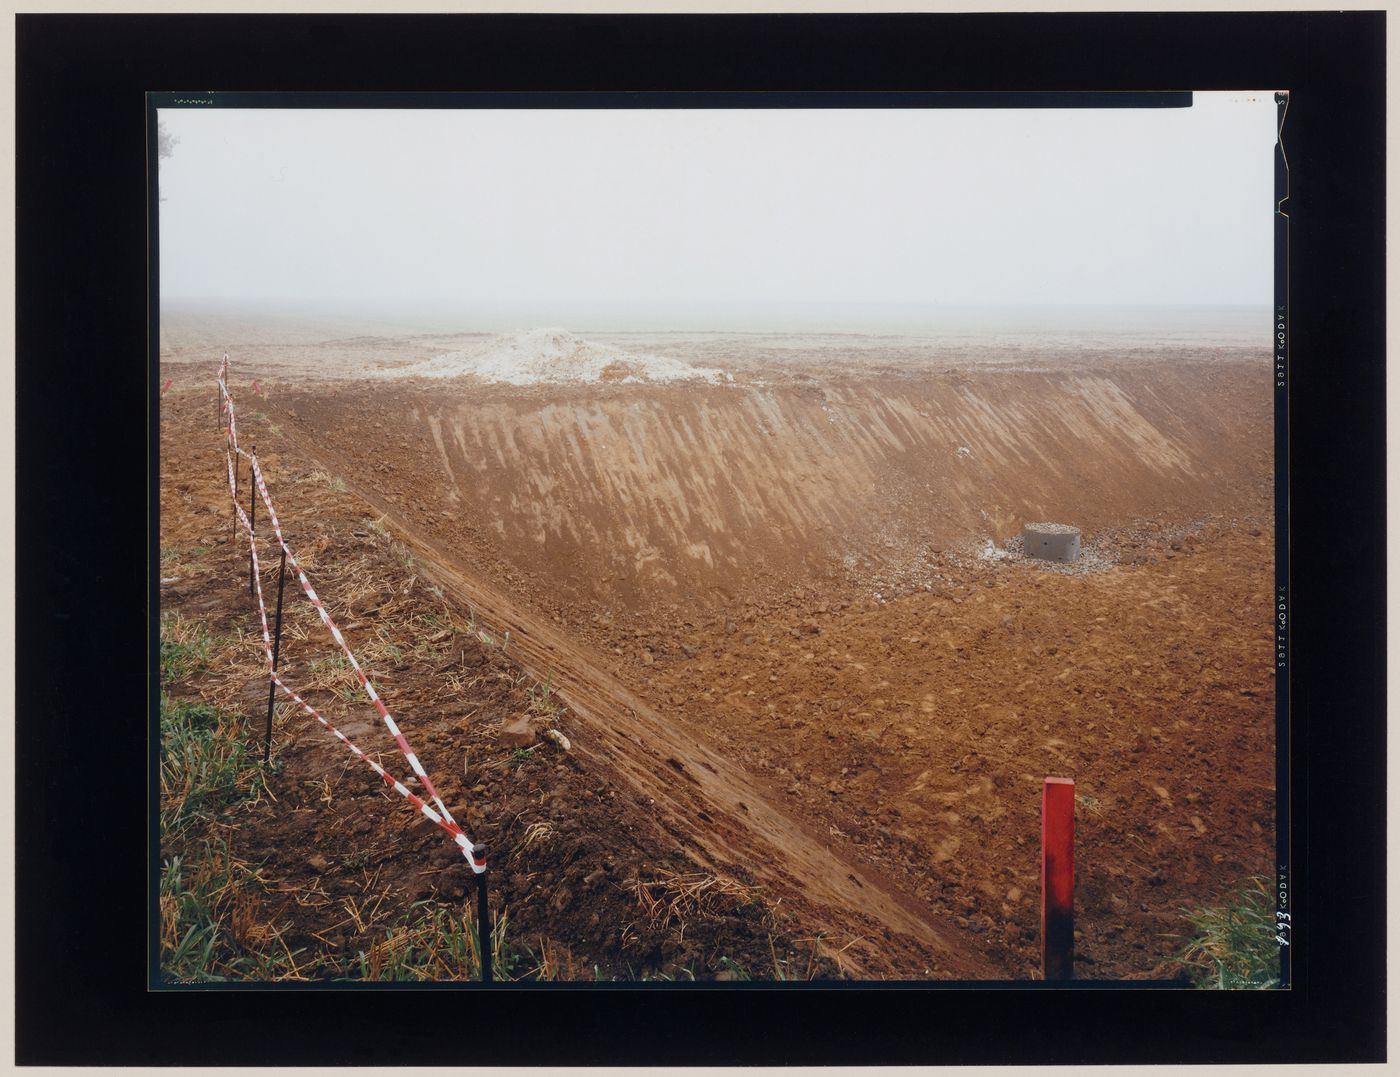 View of an excavation showing striped caution tape, Leuze, near Namur, Belgium (from the series "In between cities")